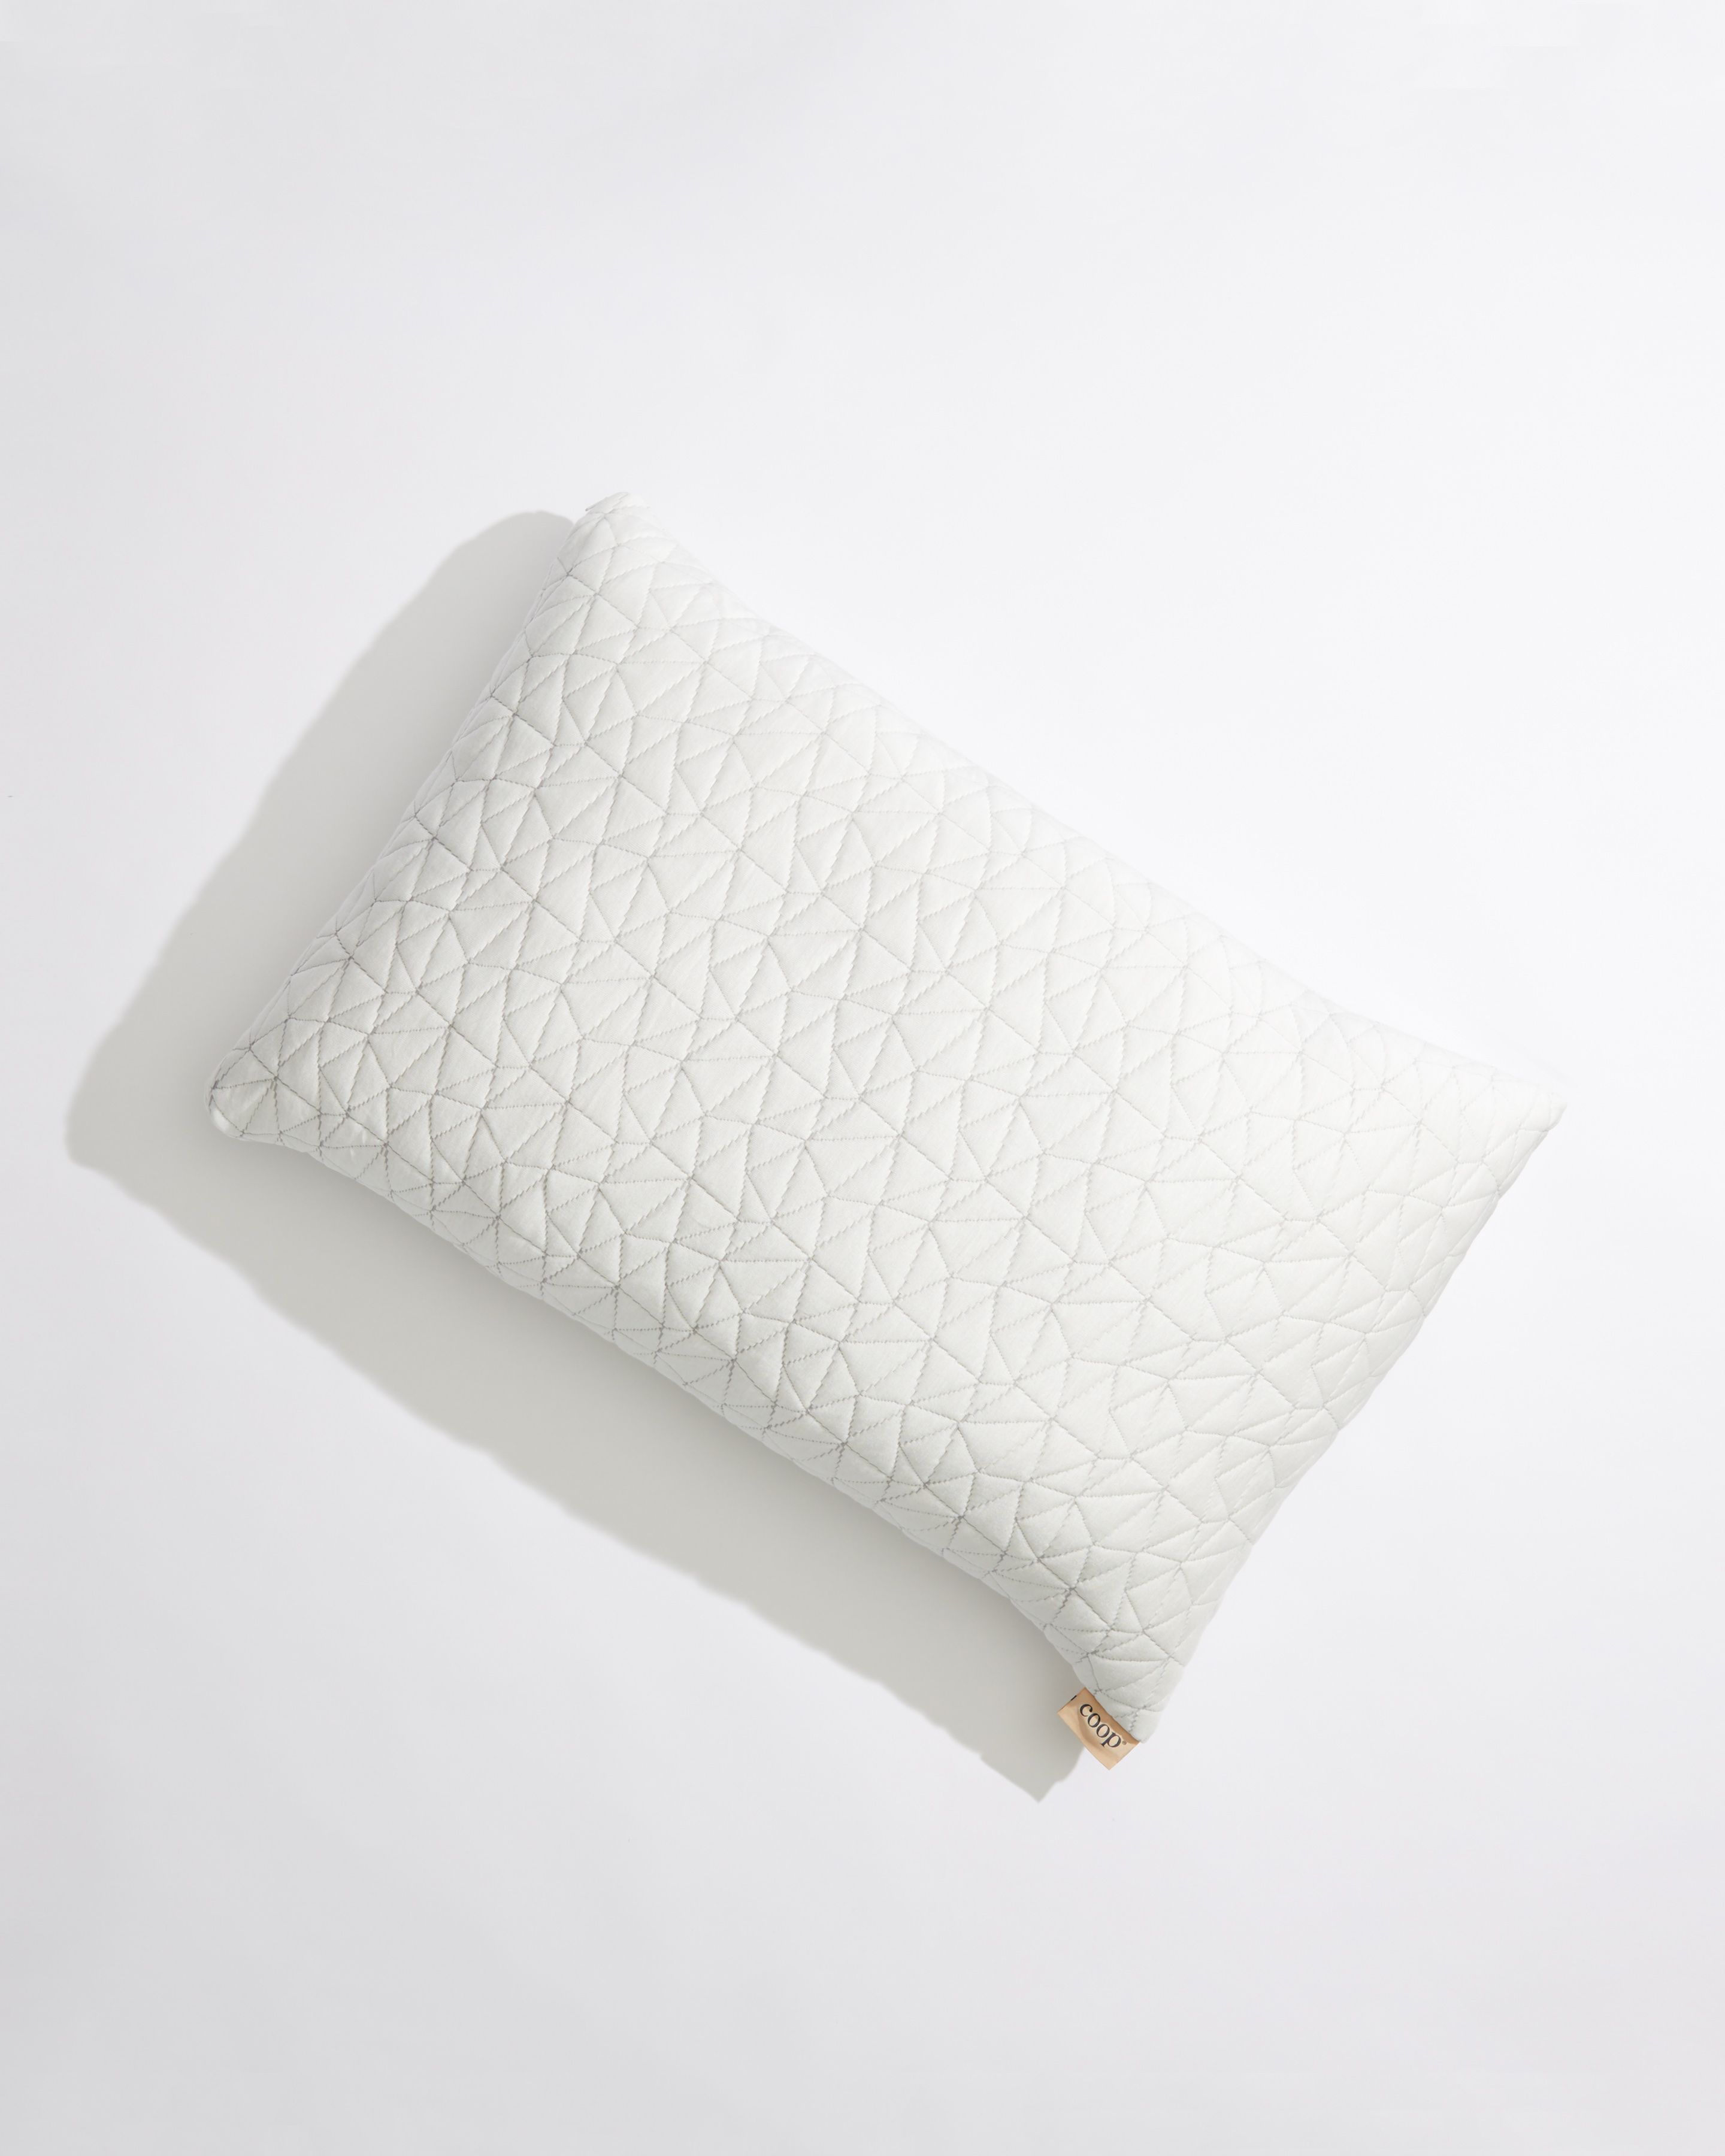 Coop Home Goods Original Pillow Review, Price, and Where to Buy